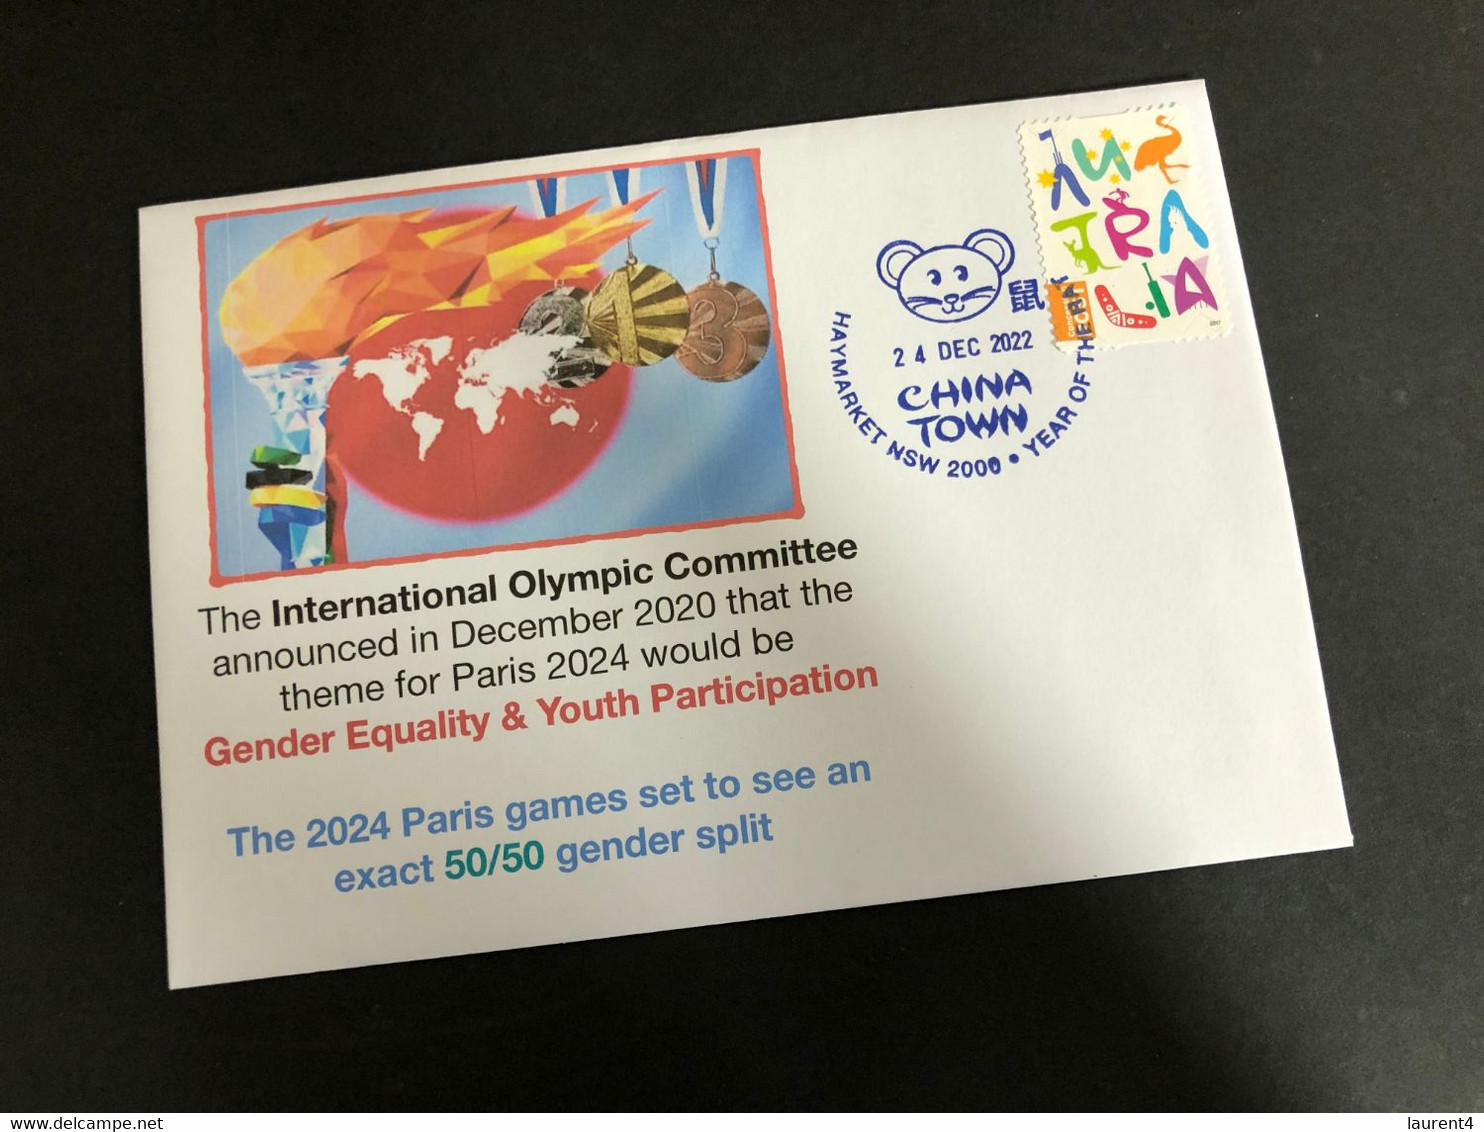 (2 N 8) 2024 France Olympic Games - Gender Equality & Youth Participation Anounced Theme Of The Paris Games (24-12-2022) - Eté 2024 : Paris